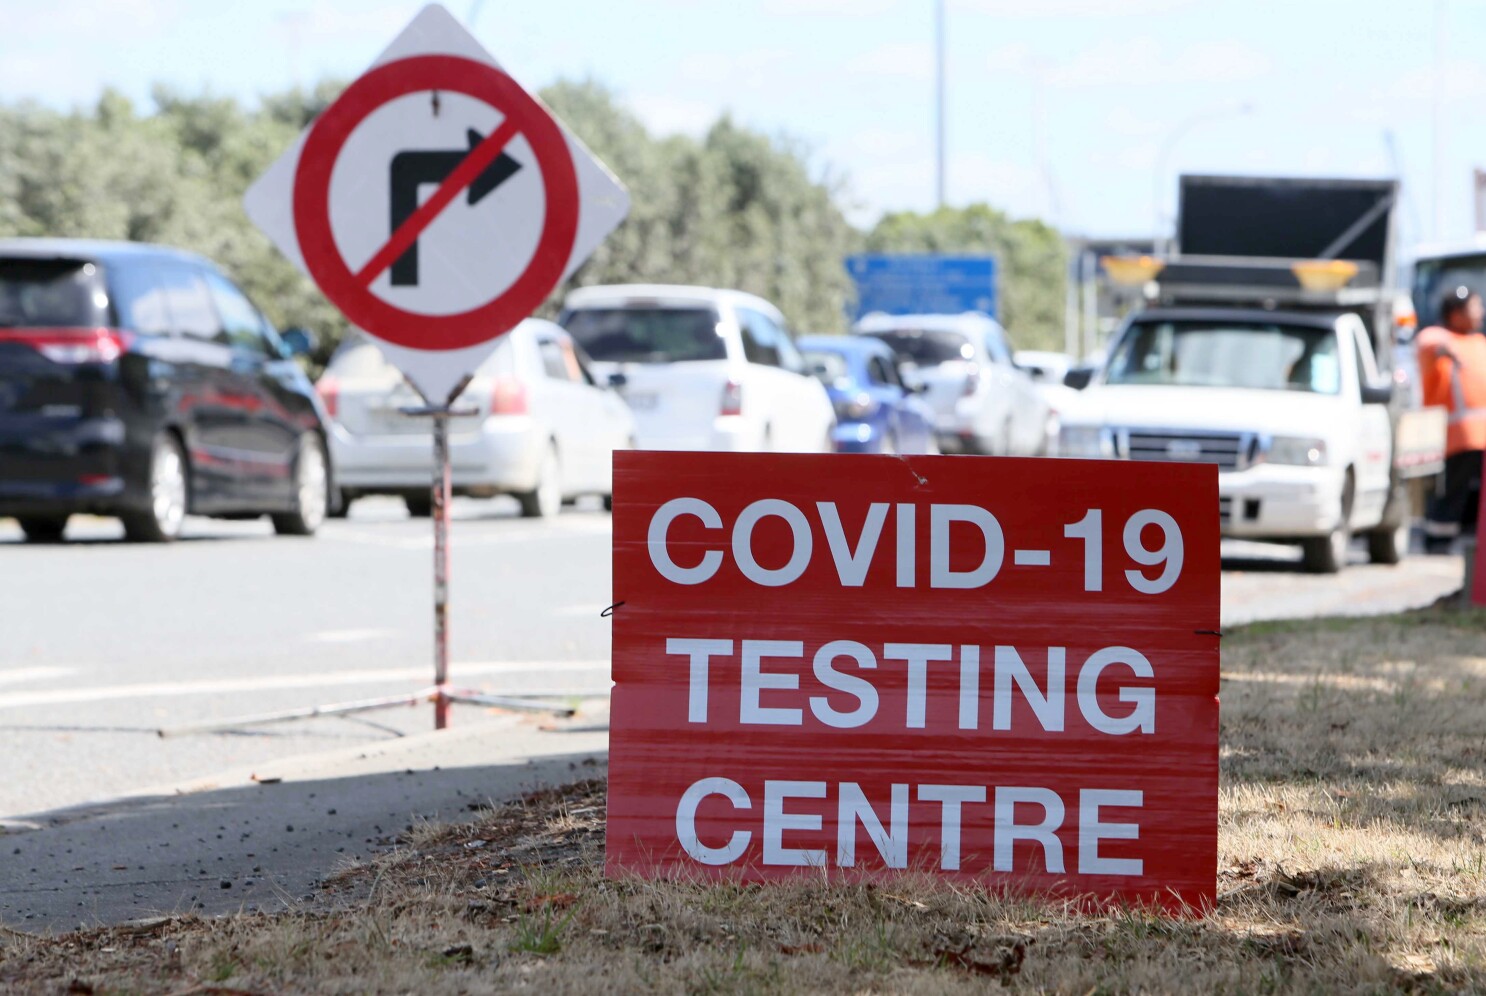 New Zealand City Going Into Lockdown After Coronavirus Found Los Angeles Times